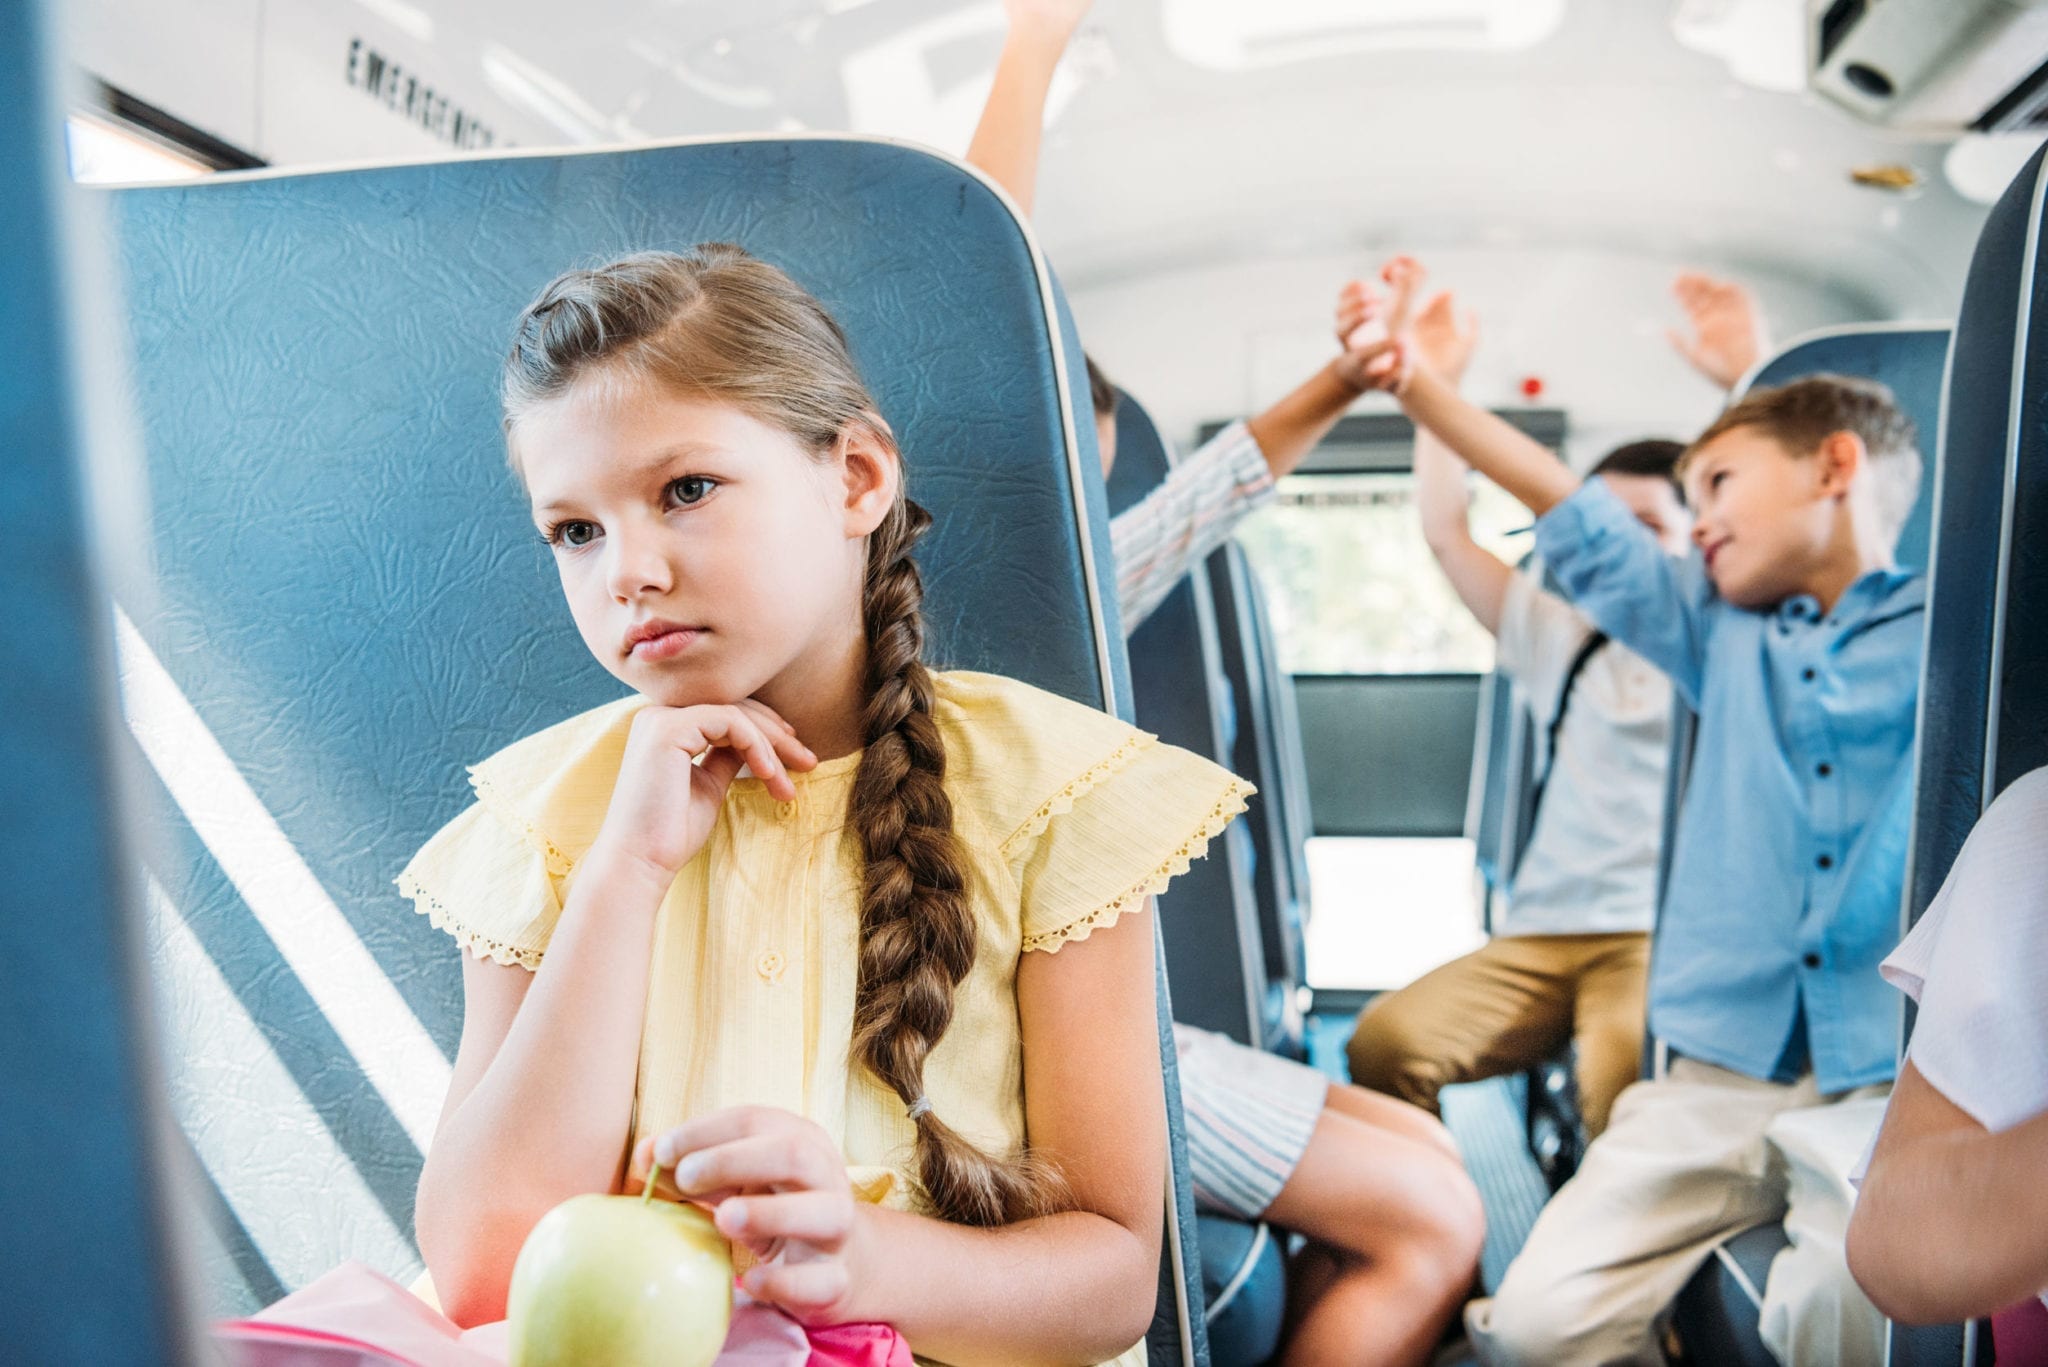 When Negligence Results in a Florida School Bus Injury